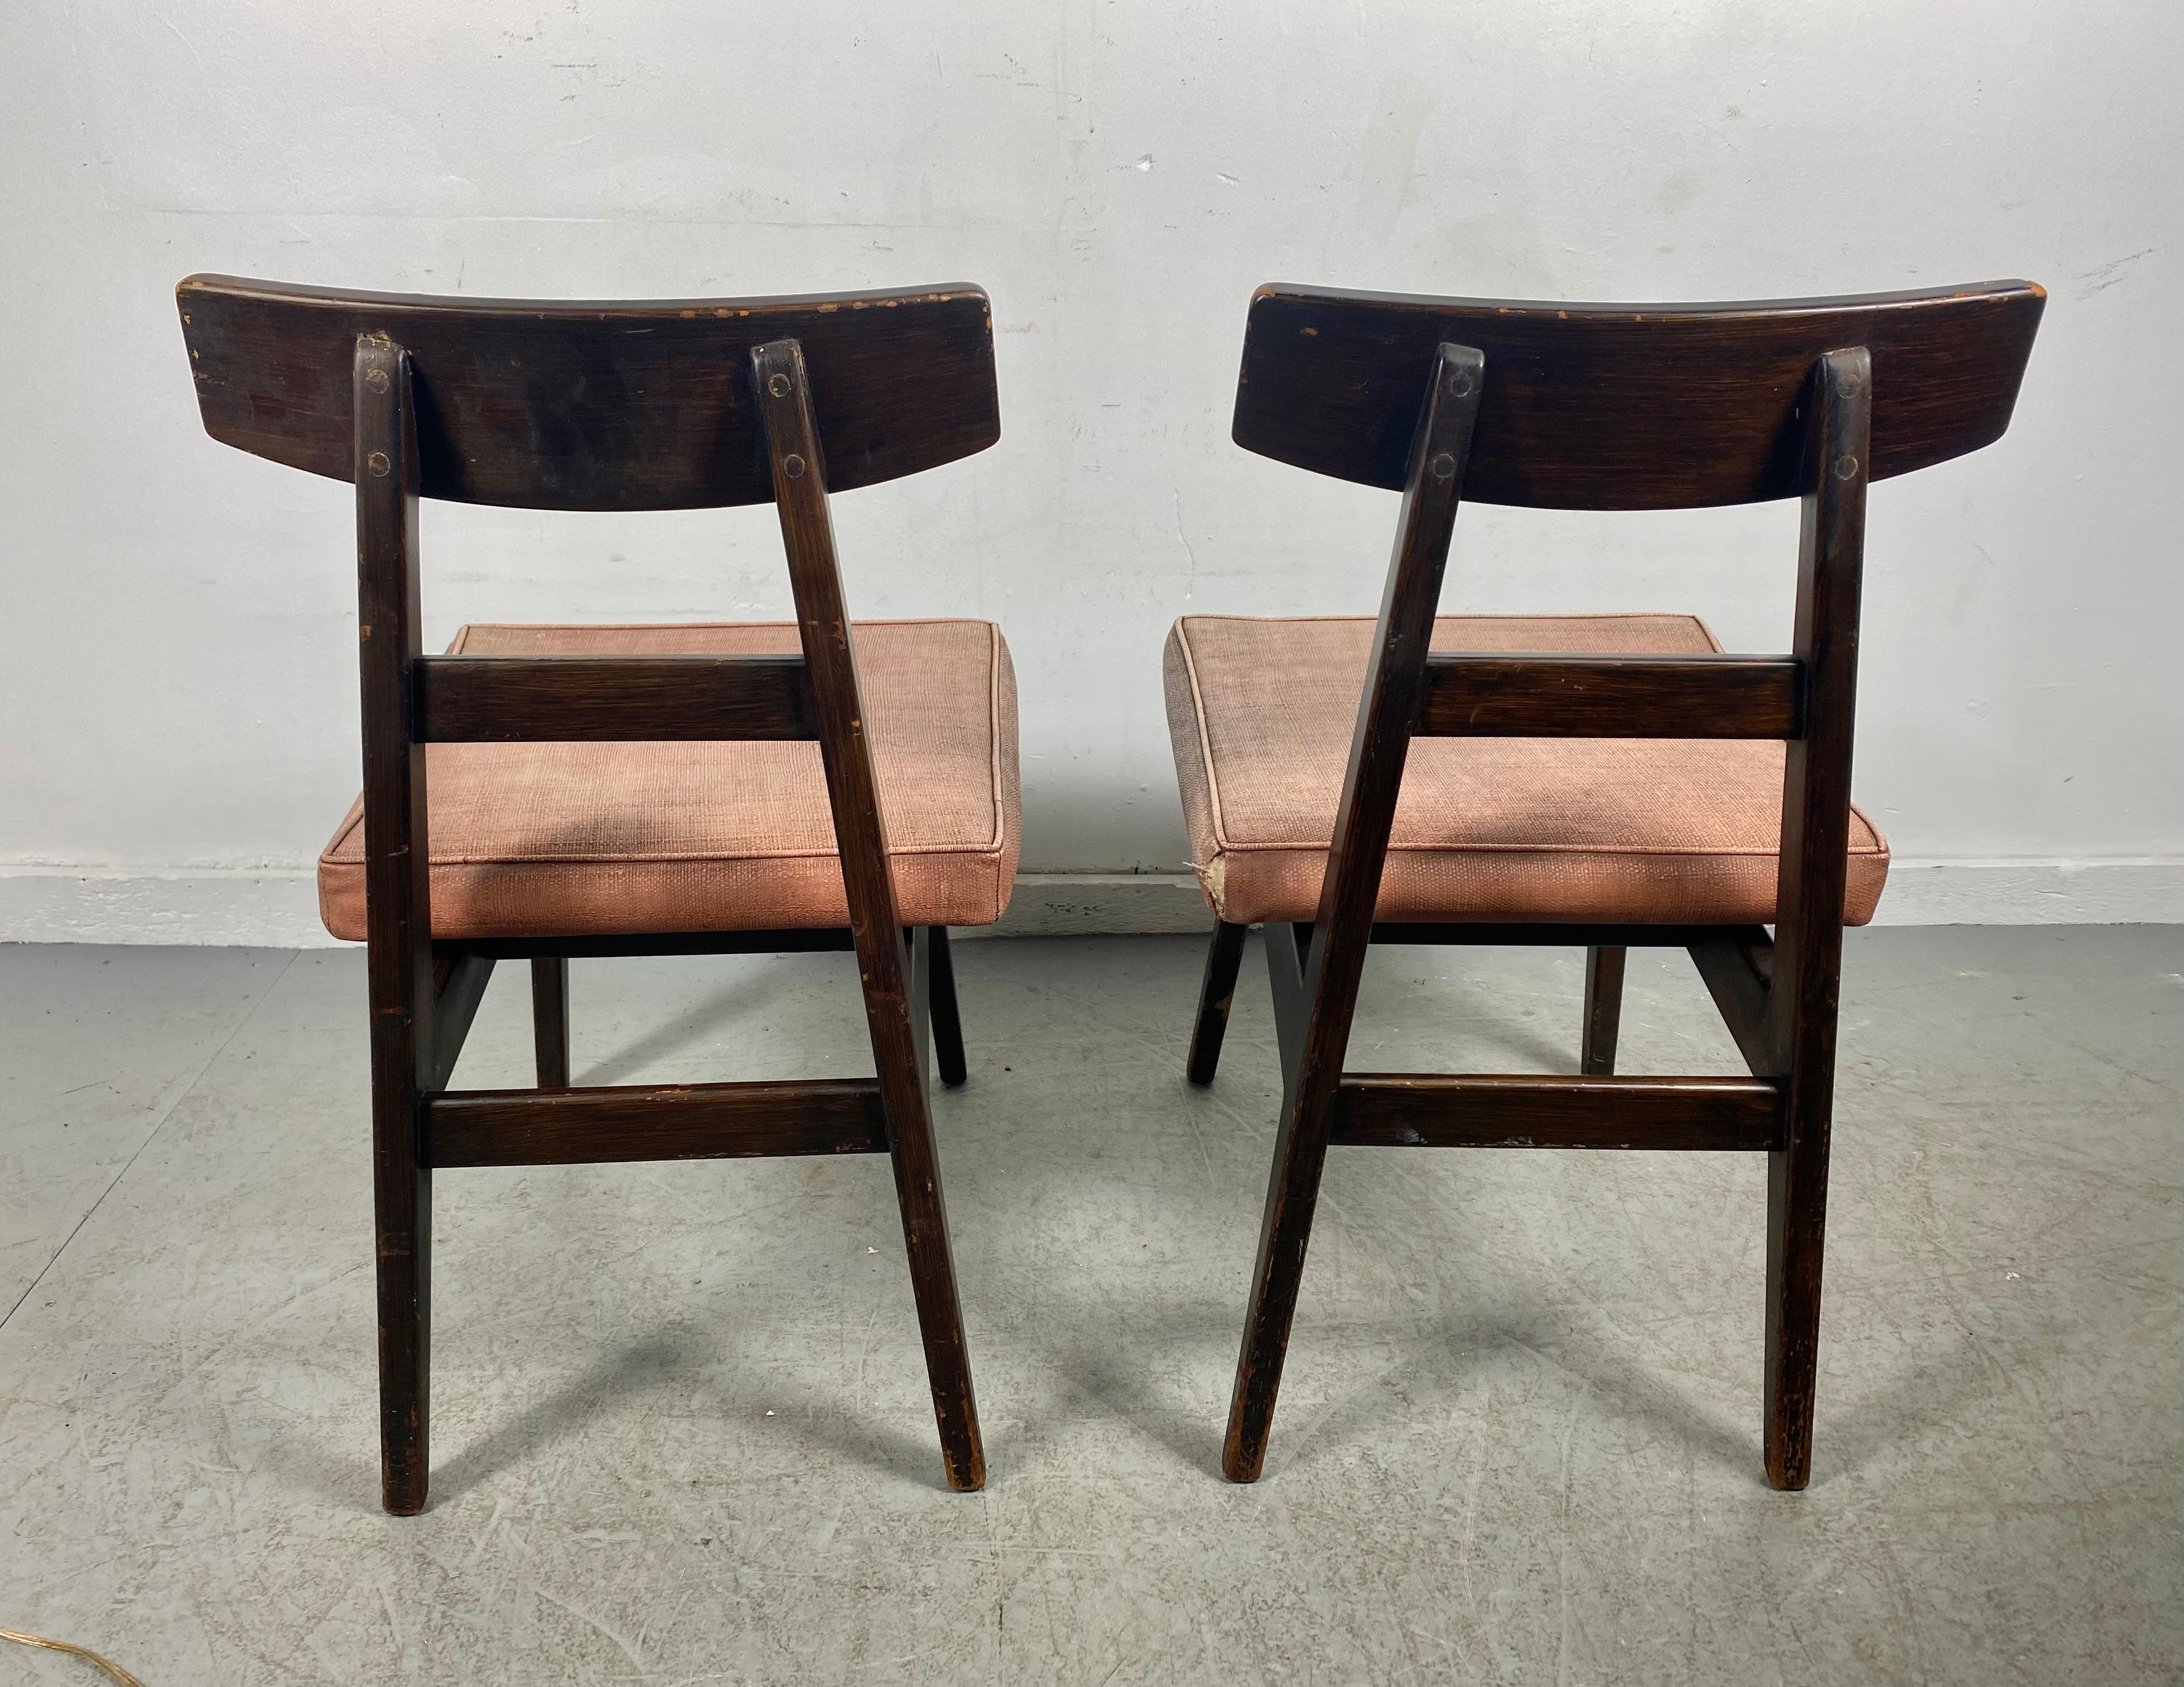 American Extremely Rare Asian Inspired Modernist Side Chairs Designed by Jens Risom For Sale